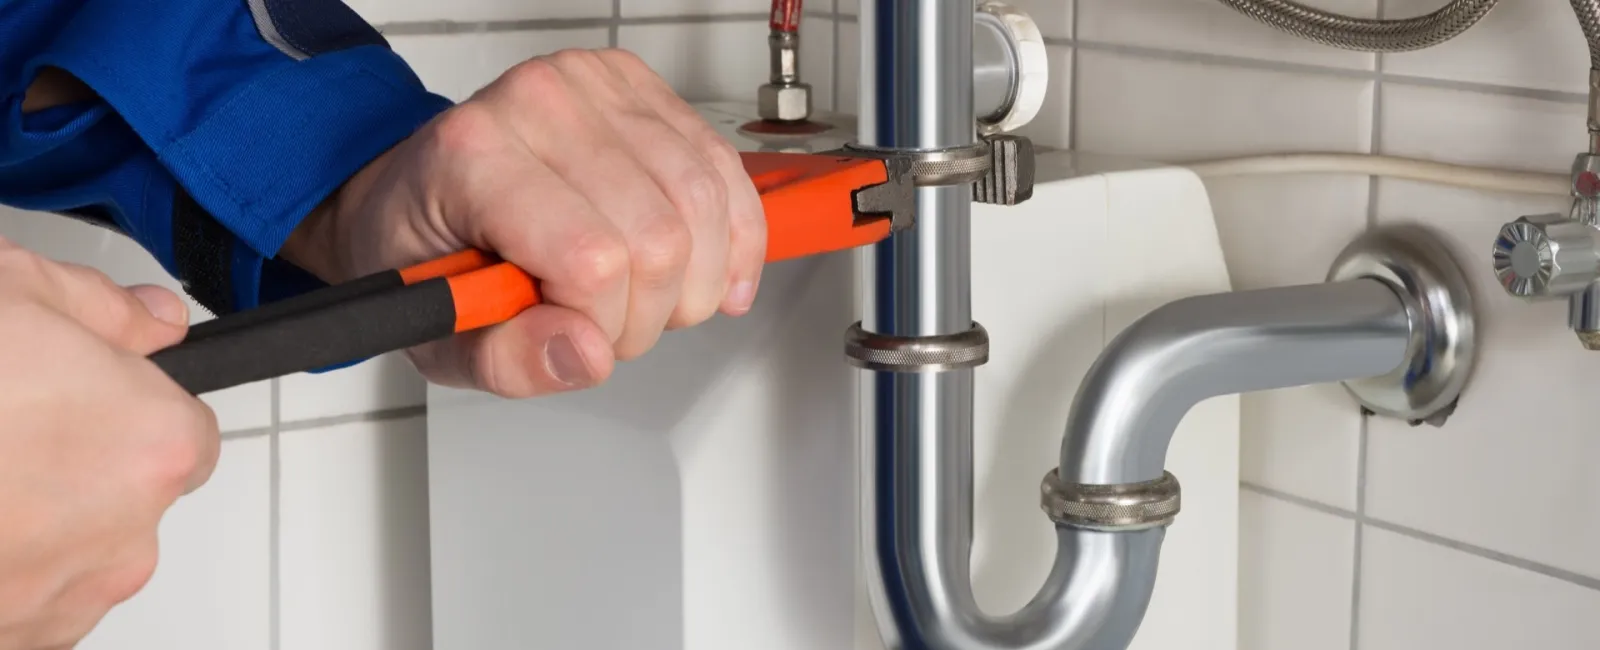 10 Things That Can Clog Your Sink Drains